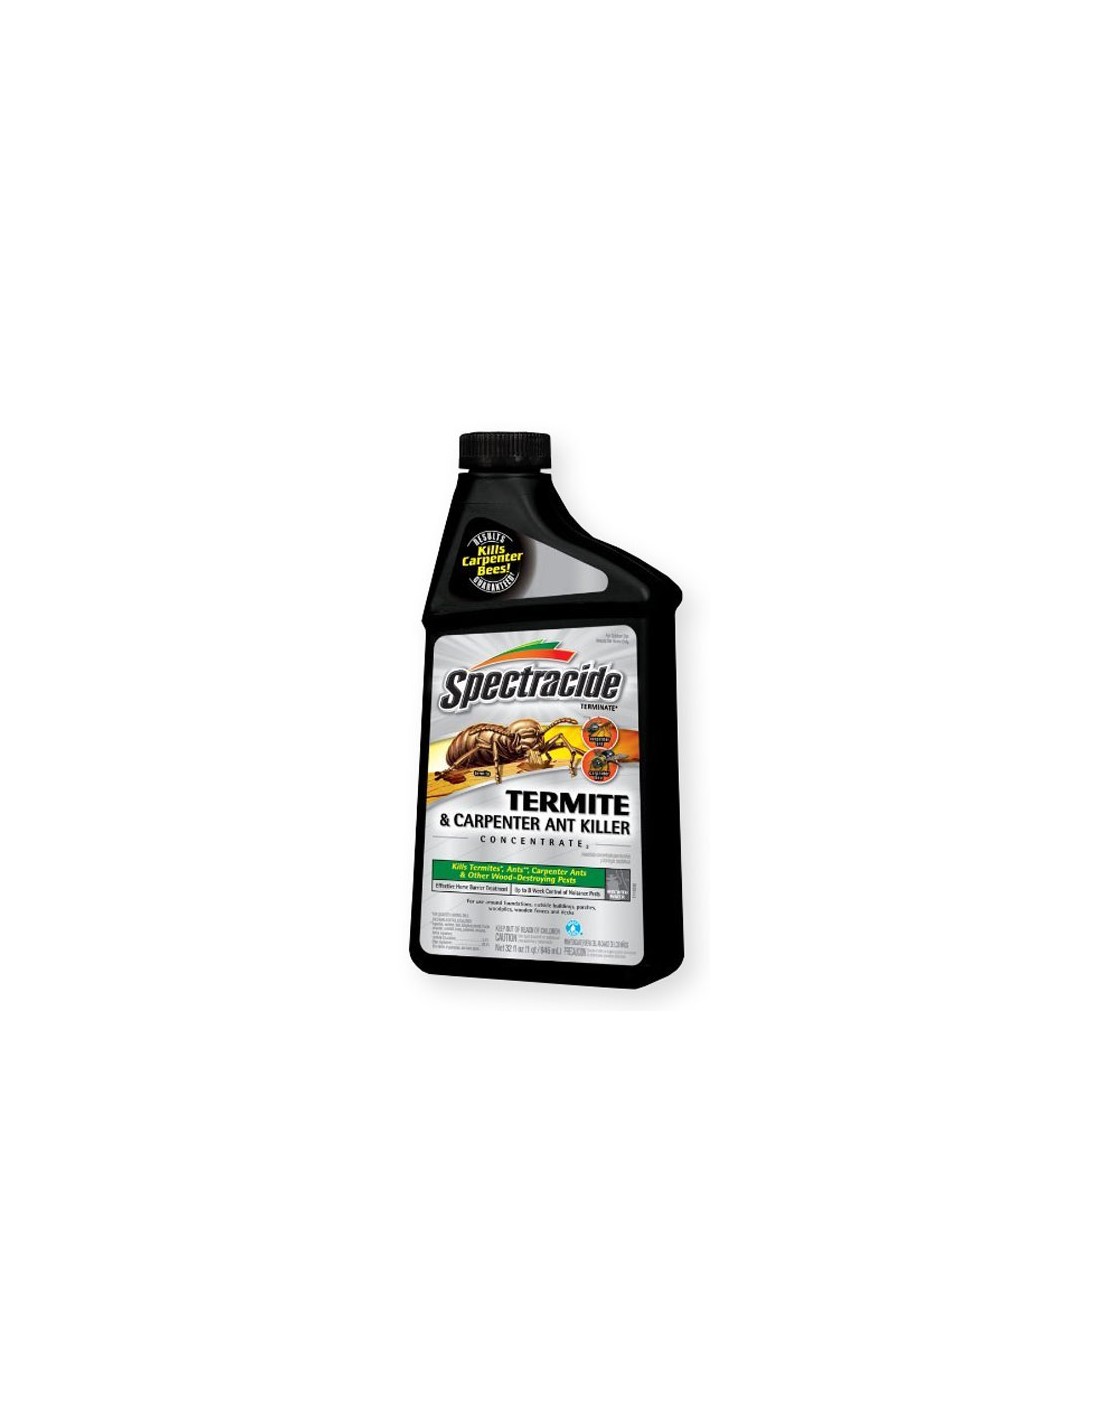 How much water per gallon do I add to Termite and carpenter ant killer concentrate